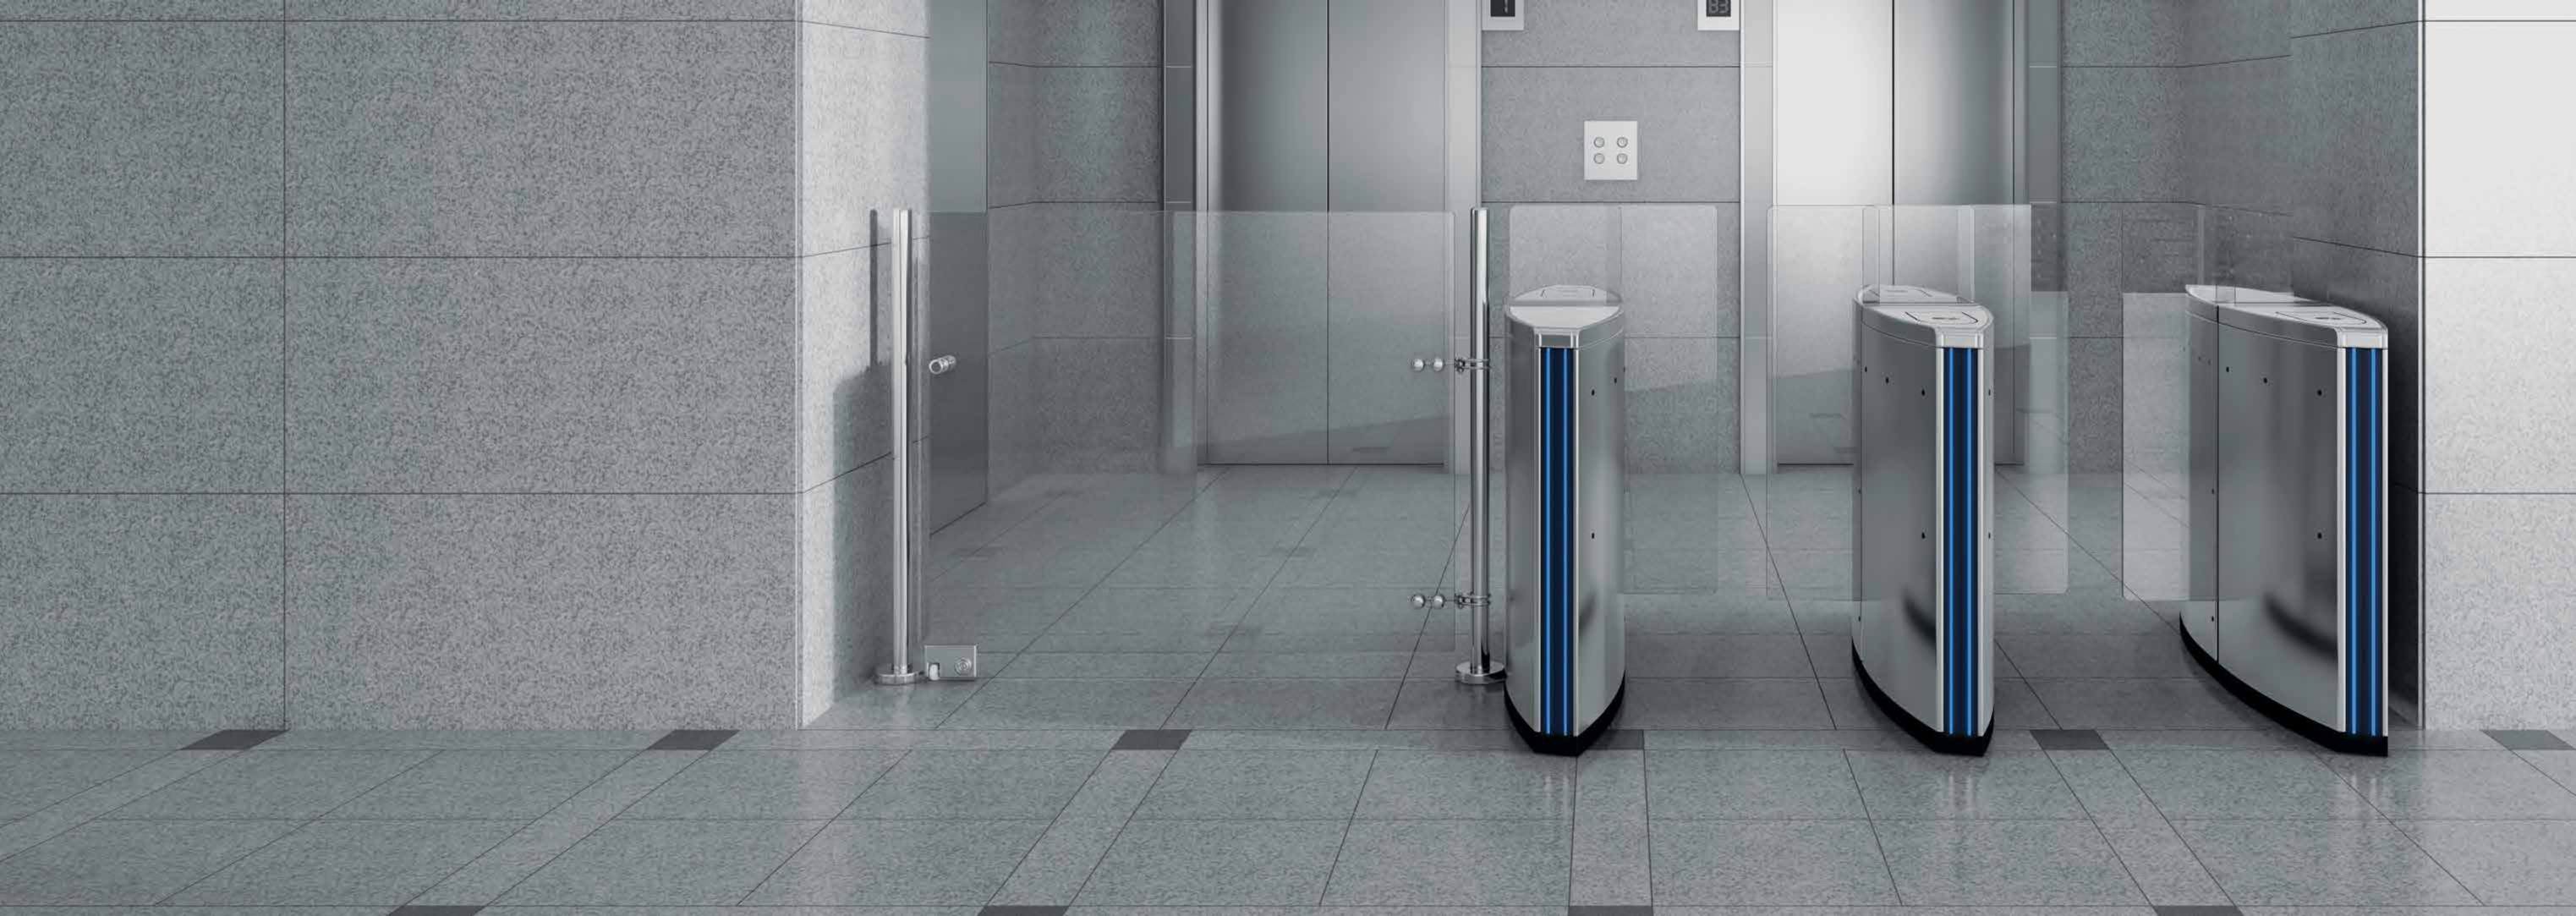 speed gate & smart turnstiles, smart gates can be custom configured with various access control devices